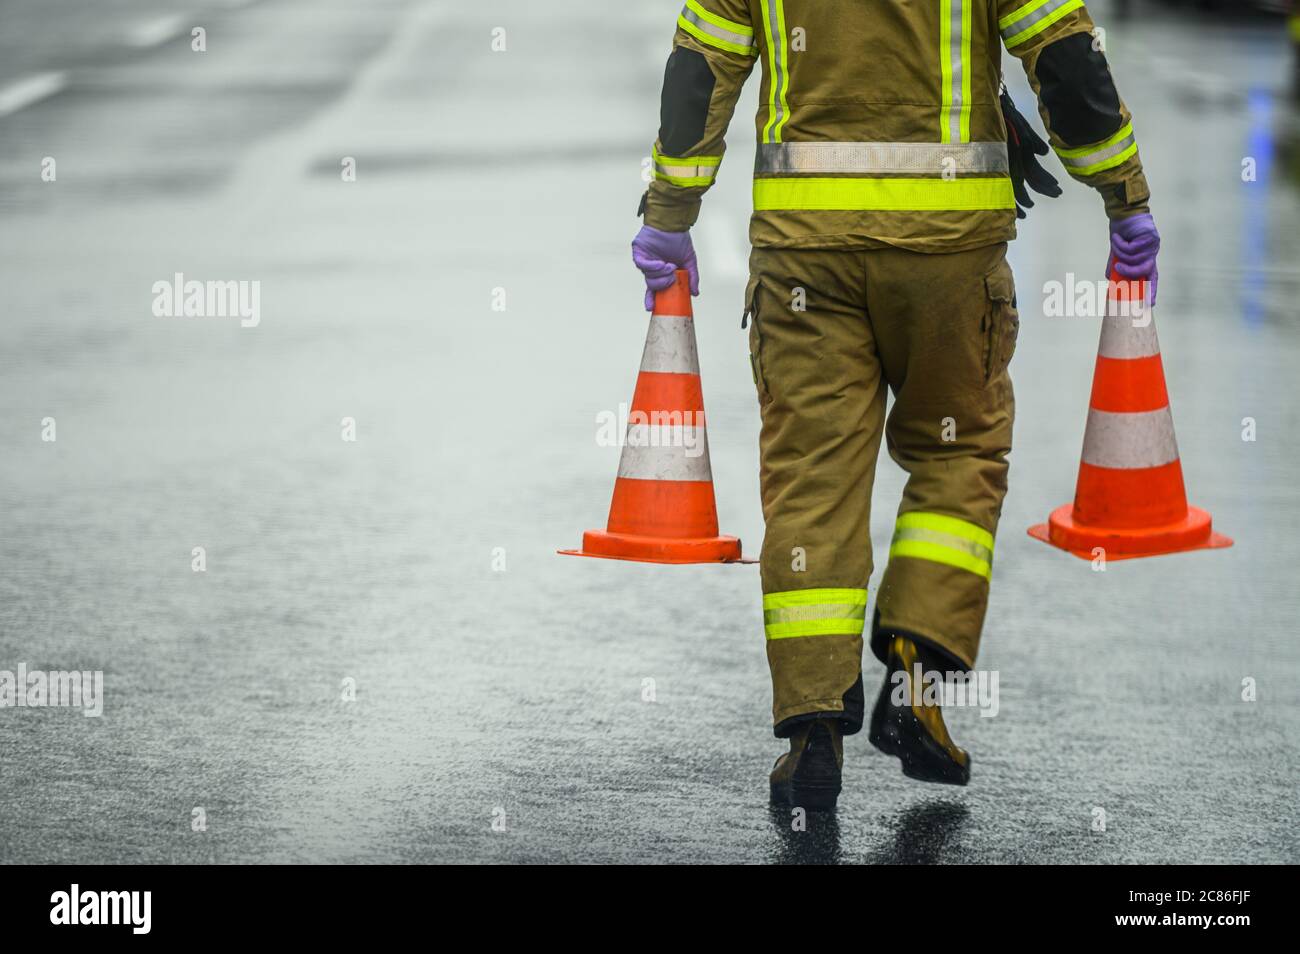 Transportation System Theme. Highway Worker Preparing For Road Closure Moving Two Traffic Cones. Transport Industry. Stock Photo